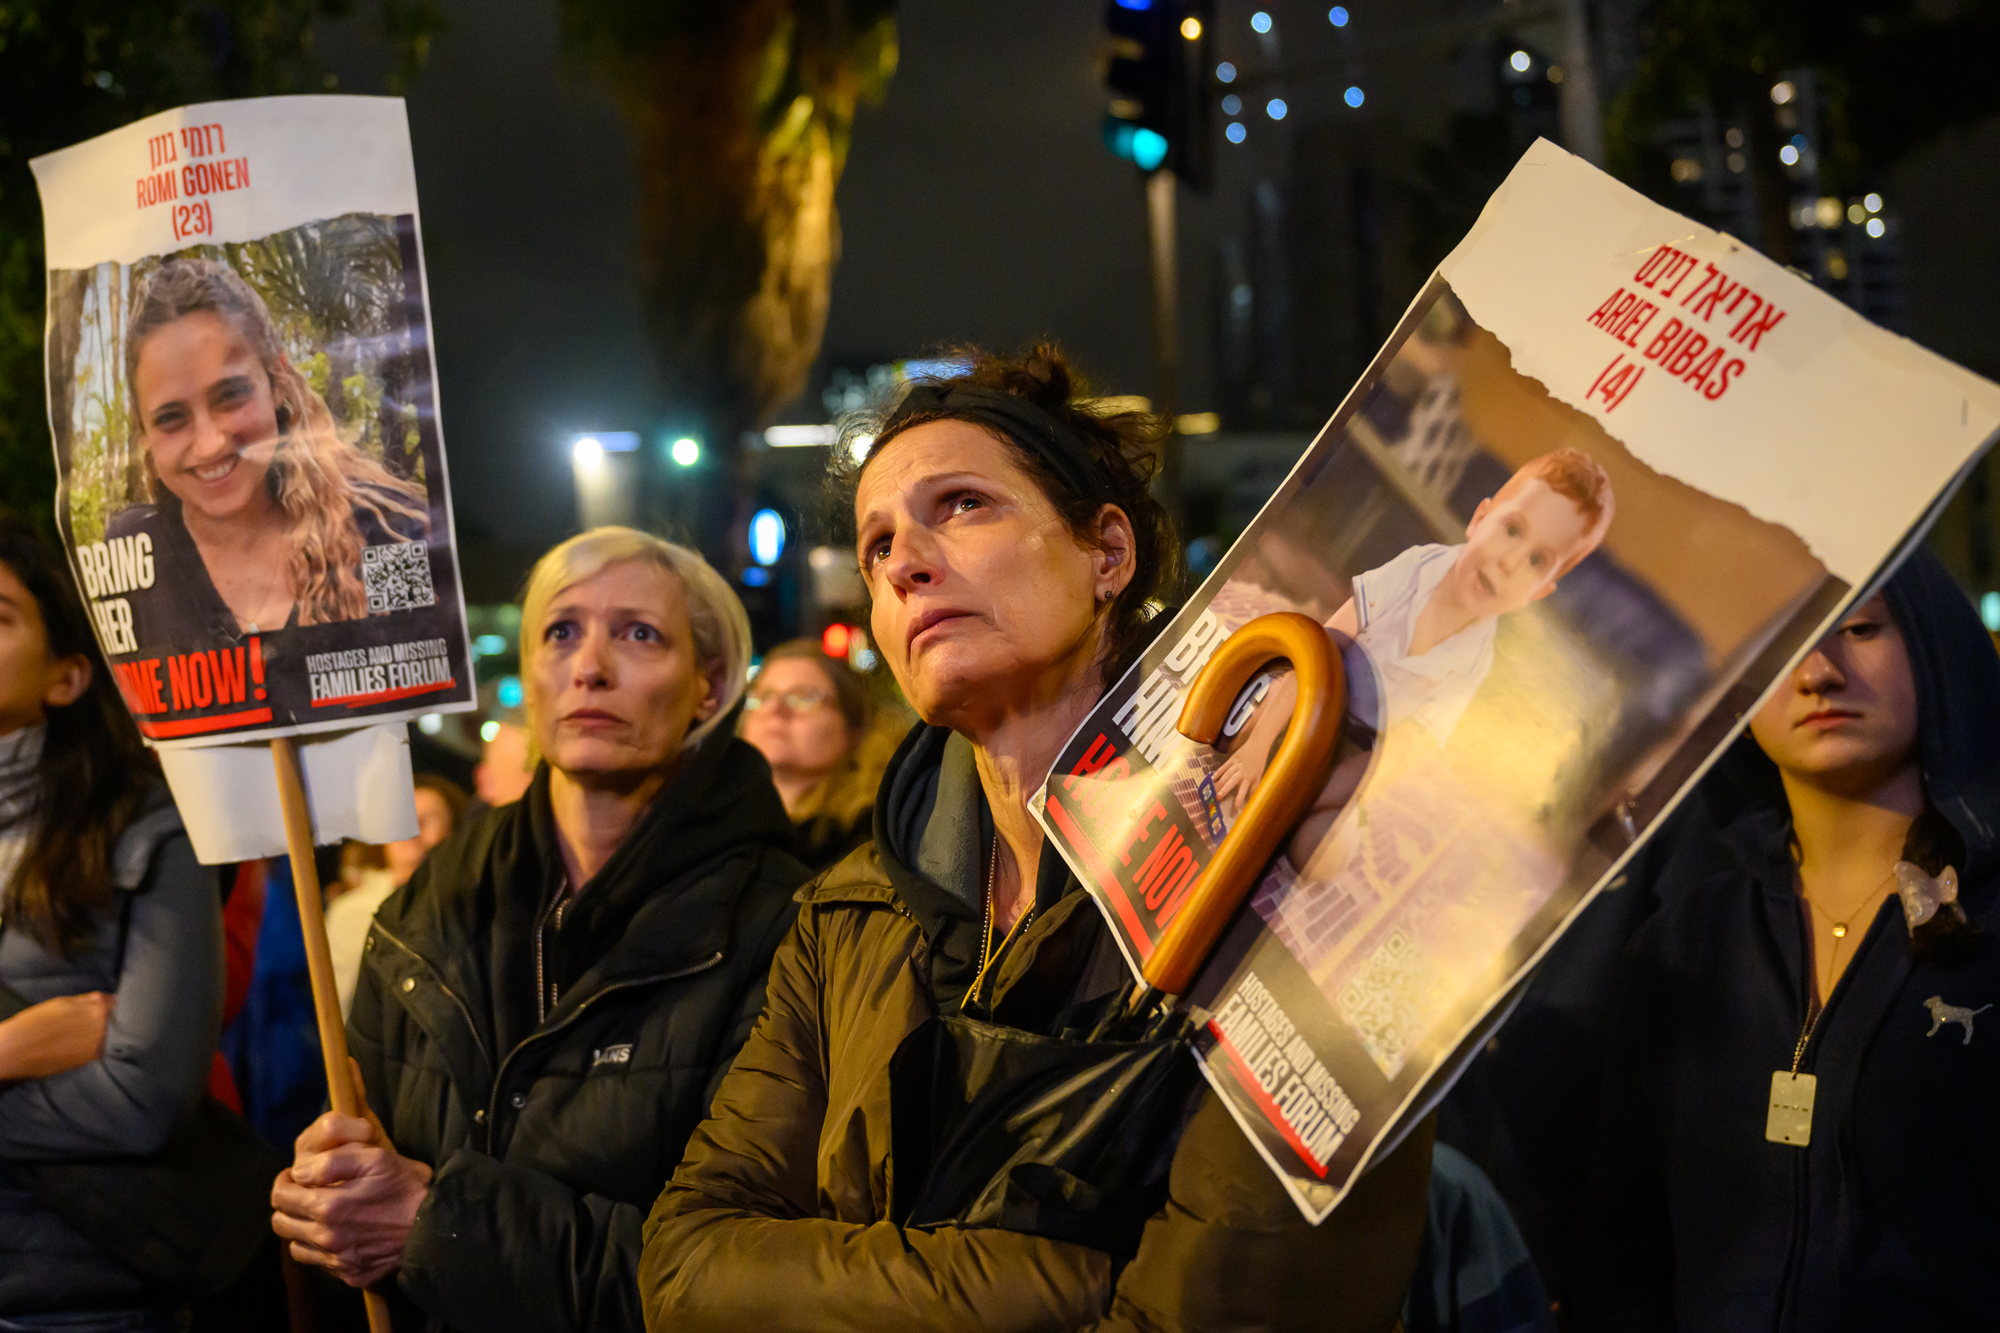 Families of hostages and their supporters call for the release of the hostages during a rally held outside The Museum of Art known as the 'The Hostages and Missing Square' on December 23 in Tel Aviv, Israel.